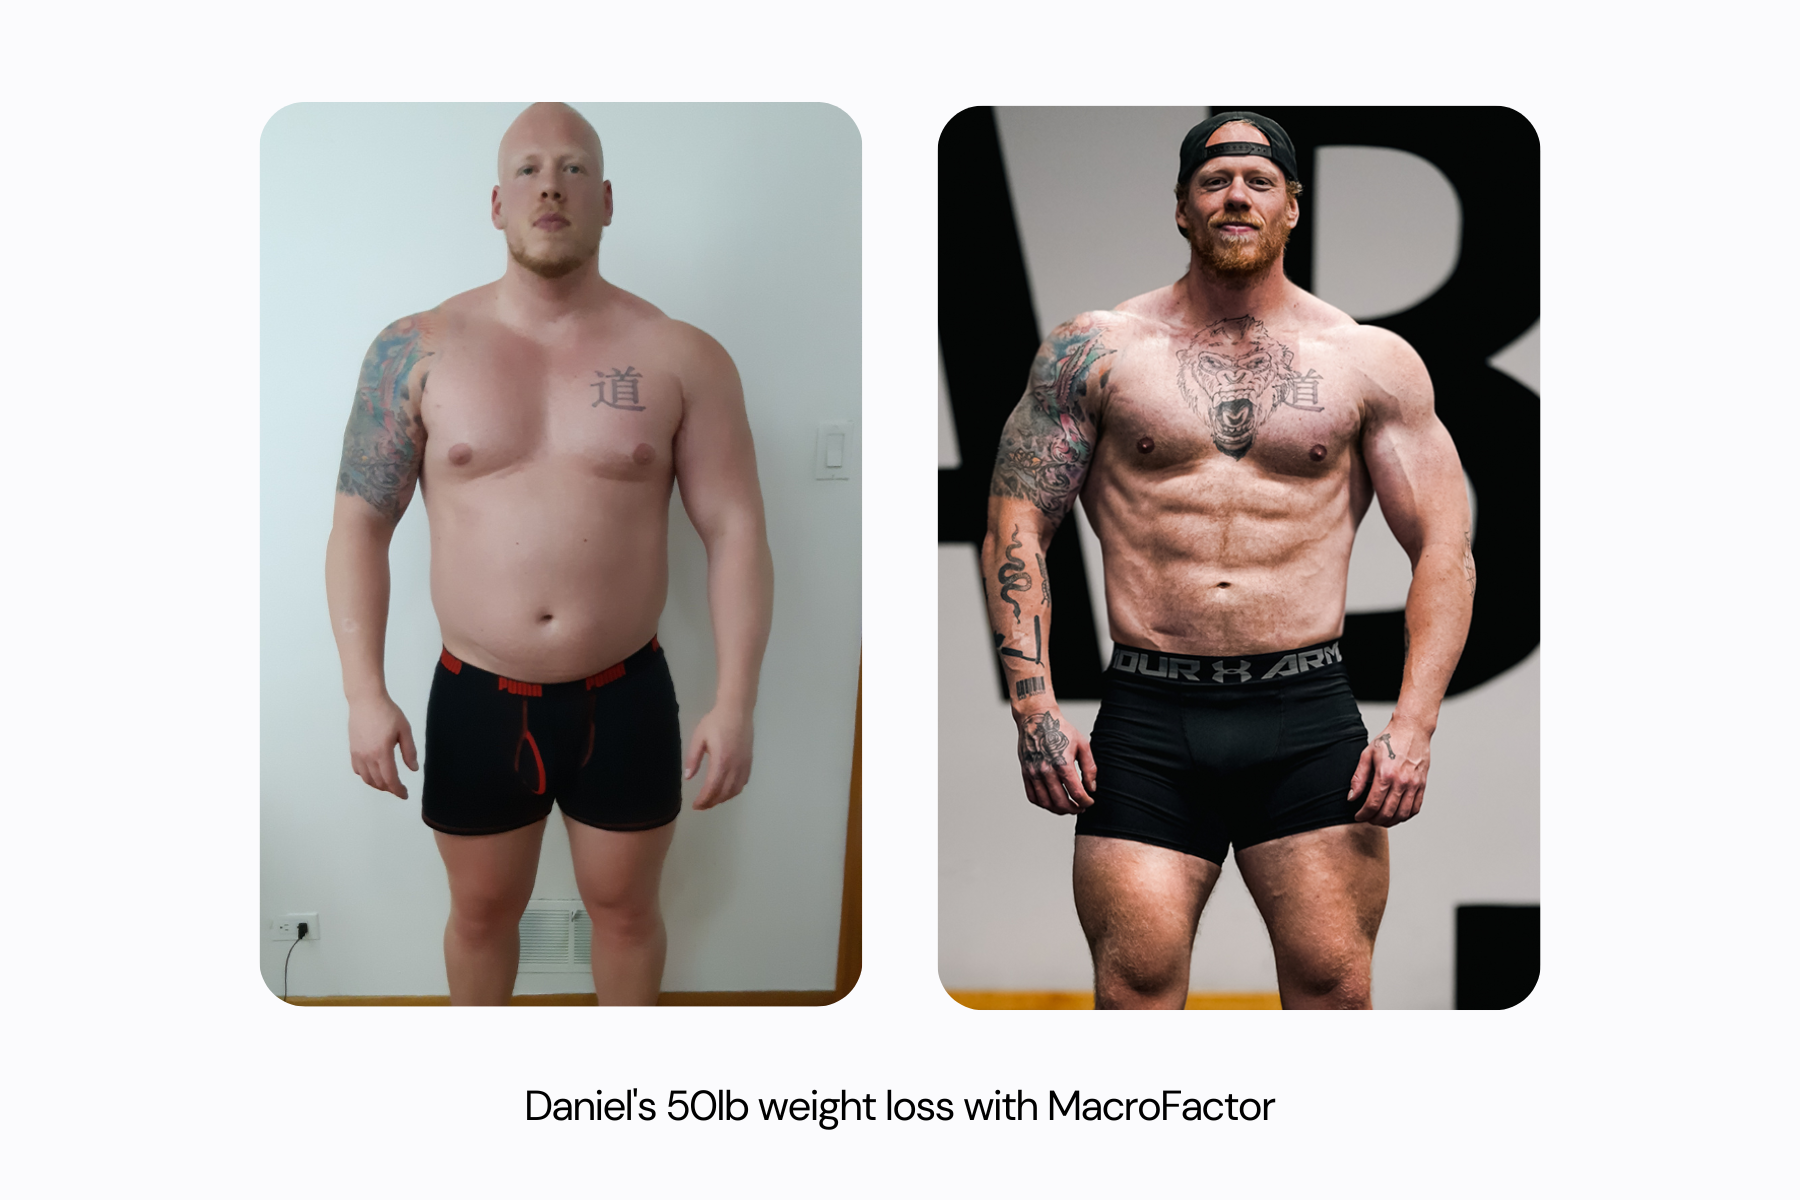 How Daniel Used MacroFactor to Lose 50lb While Maintaining Muscle